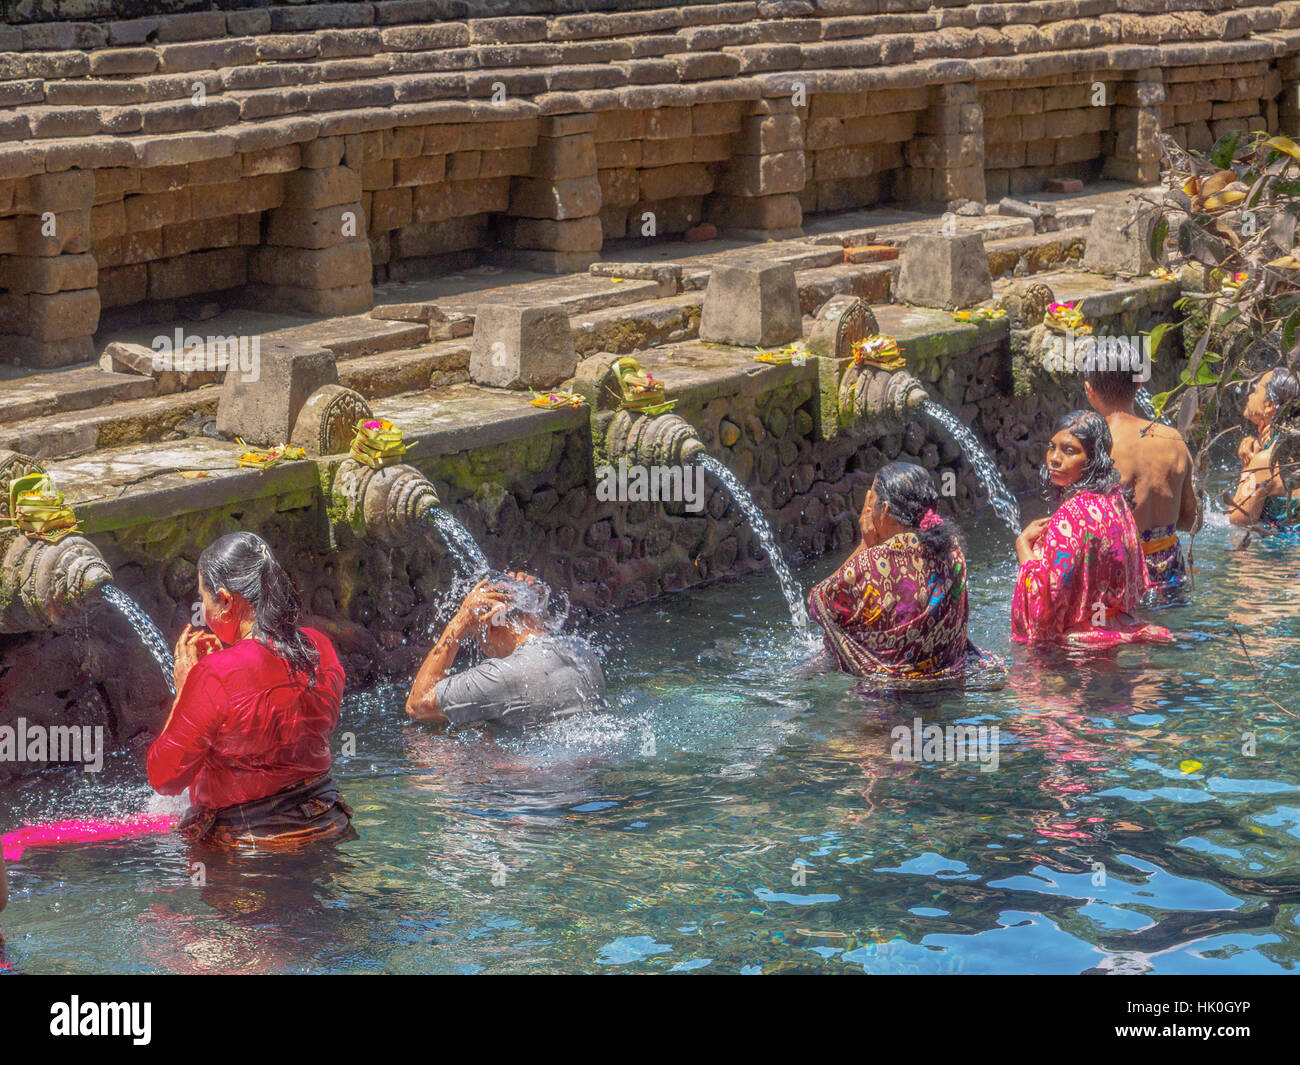 Bathing in the holy waters of Pura Tirta Empul, Bali, Indonesia, Southeast Asia Stock Photo